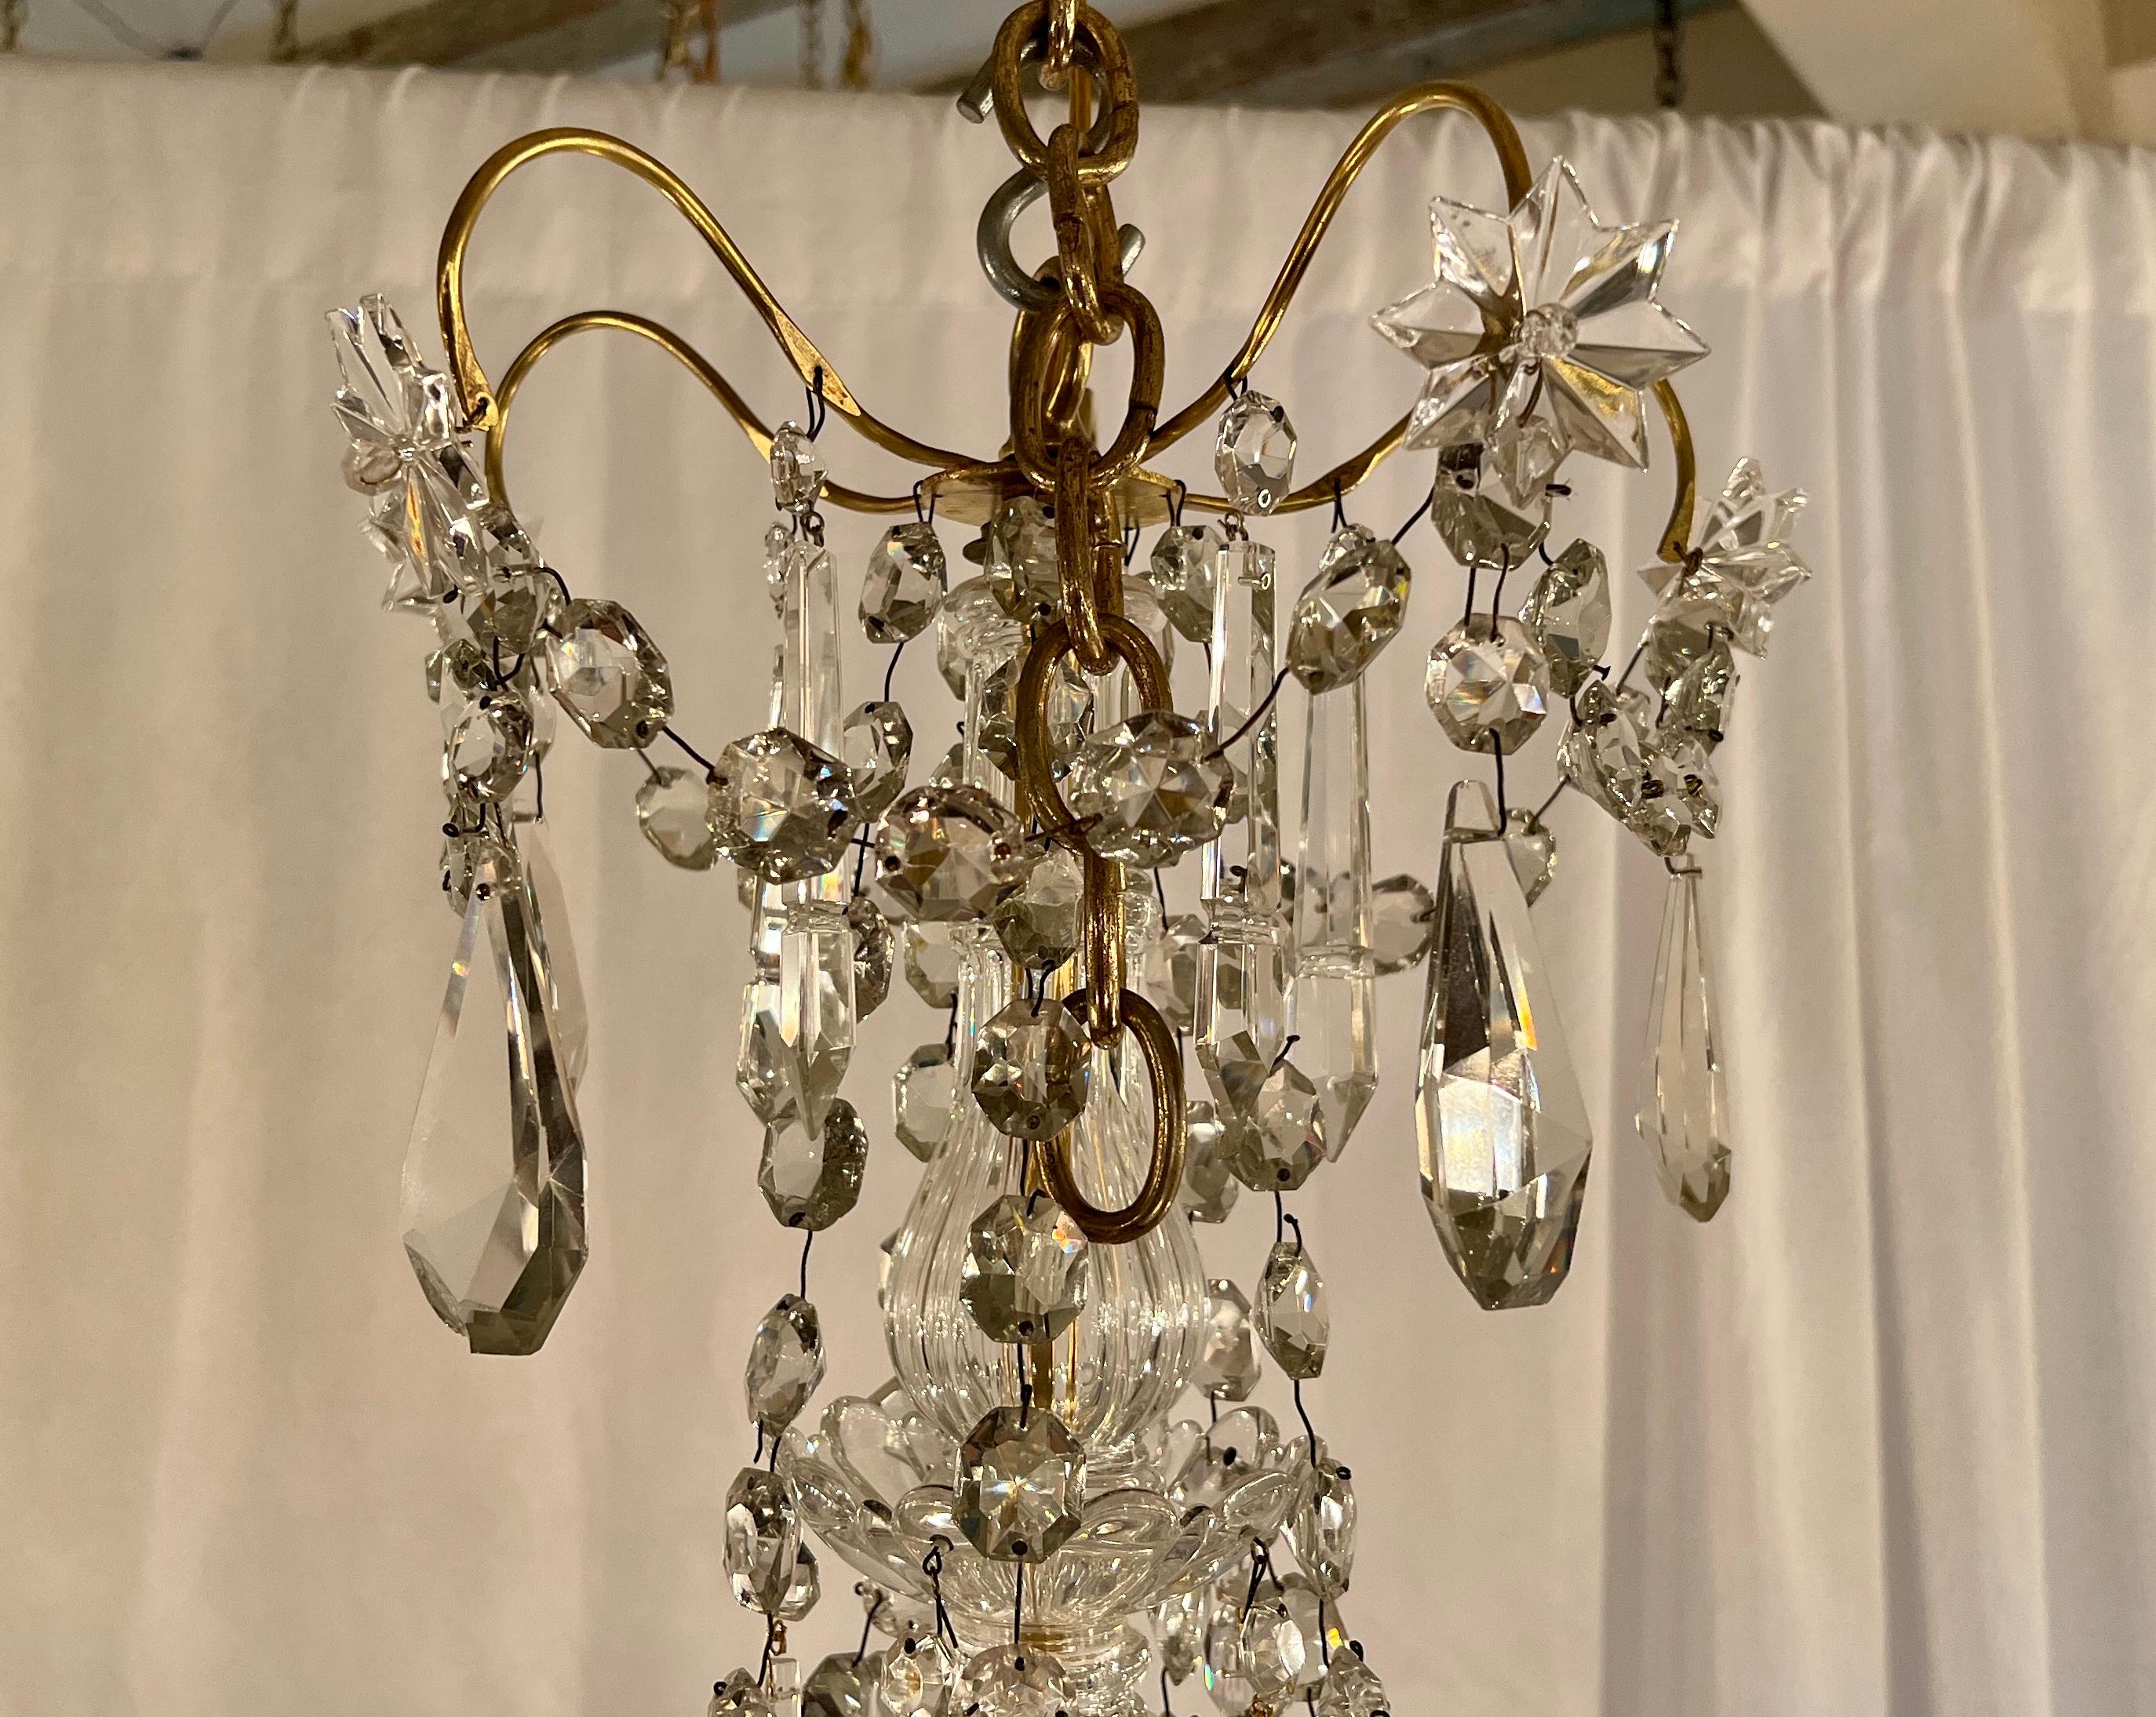 19th Century Antique French Gold Bronze and Baccarat Crystal Chandelier, Circa 1890-1900. For Sale